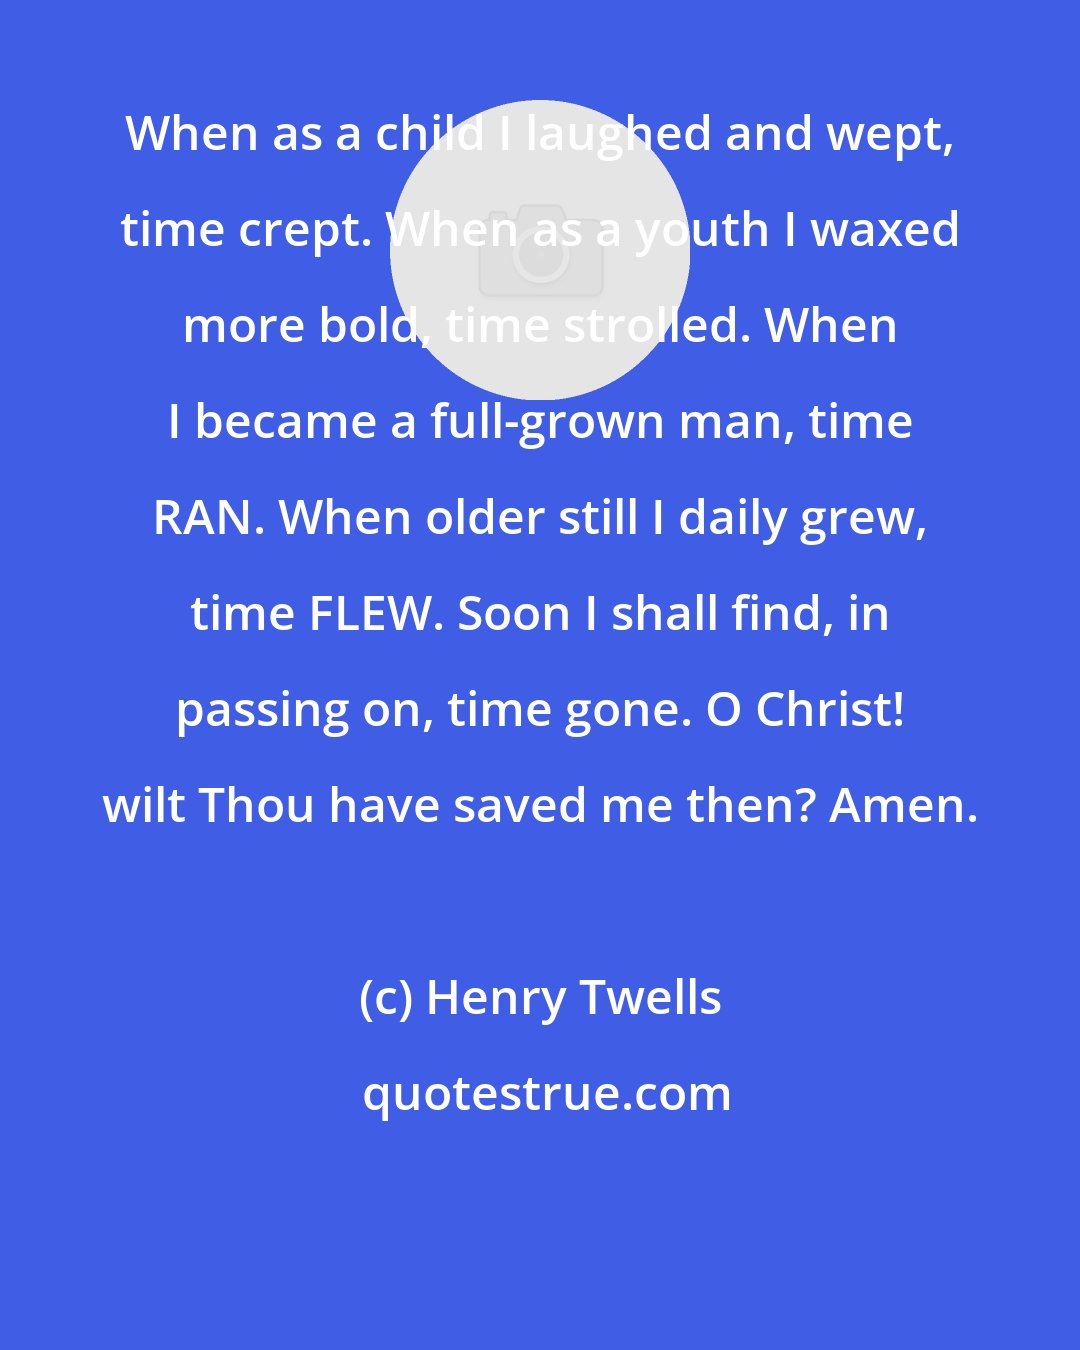 Henry Twells: When as a child I laughed and wept, time crept. When as a youth I waxed more bold, time strolled. When I became a full-grown man, time RAN. When older still I daily grew, time FLEW. Soon I shall find, in passing on, time gone. O Christ! wilt Thou have saved me then? Amen.